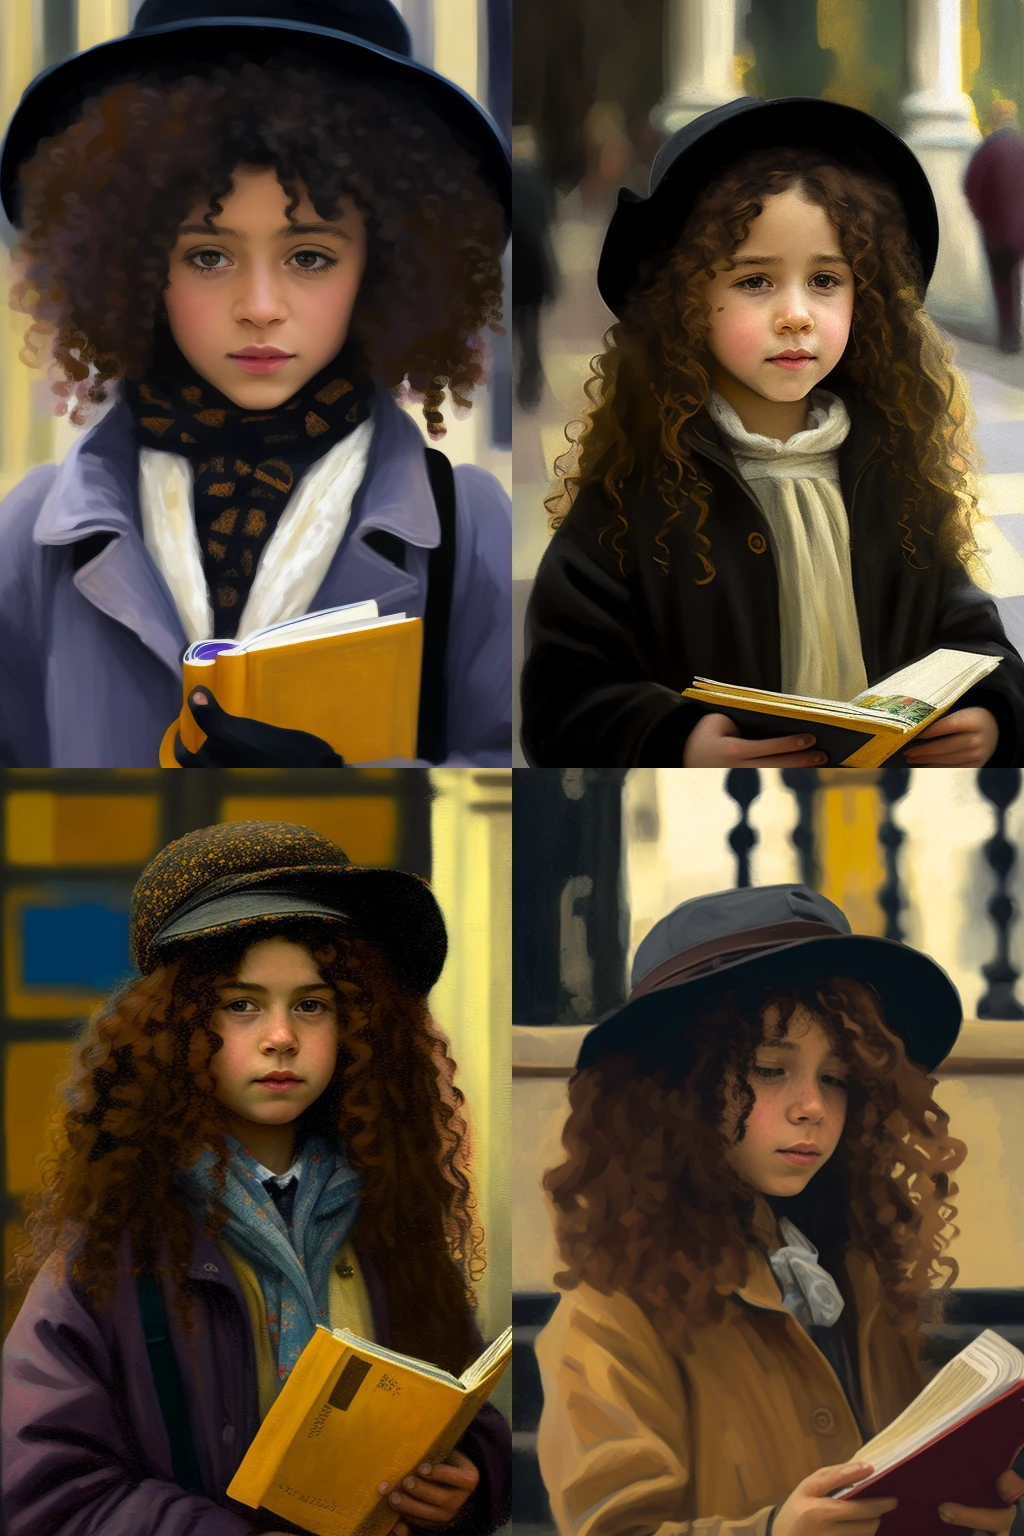 anna_hernandez_a_young_girl_with_curly_hair_and_hat_reading_a_b_97c2464c-fe76-4b1d-85a2-37c1c24fed52